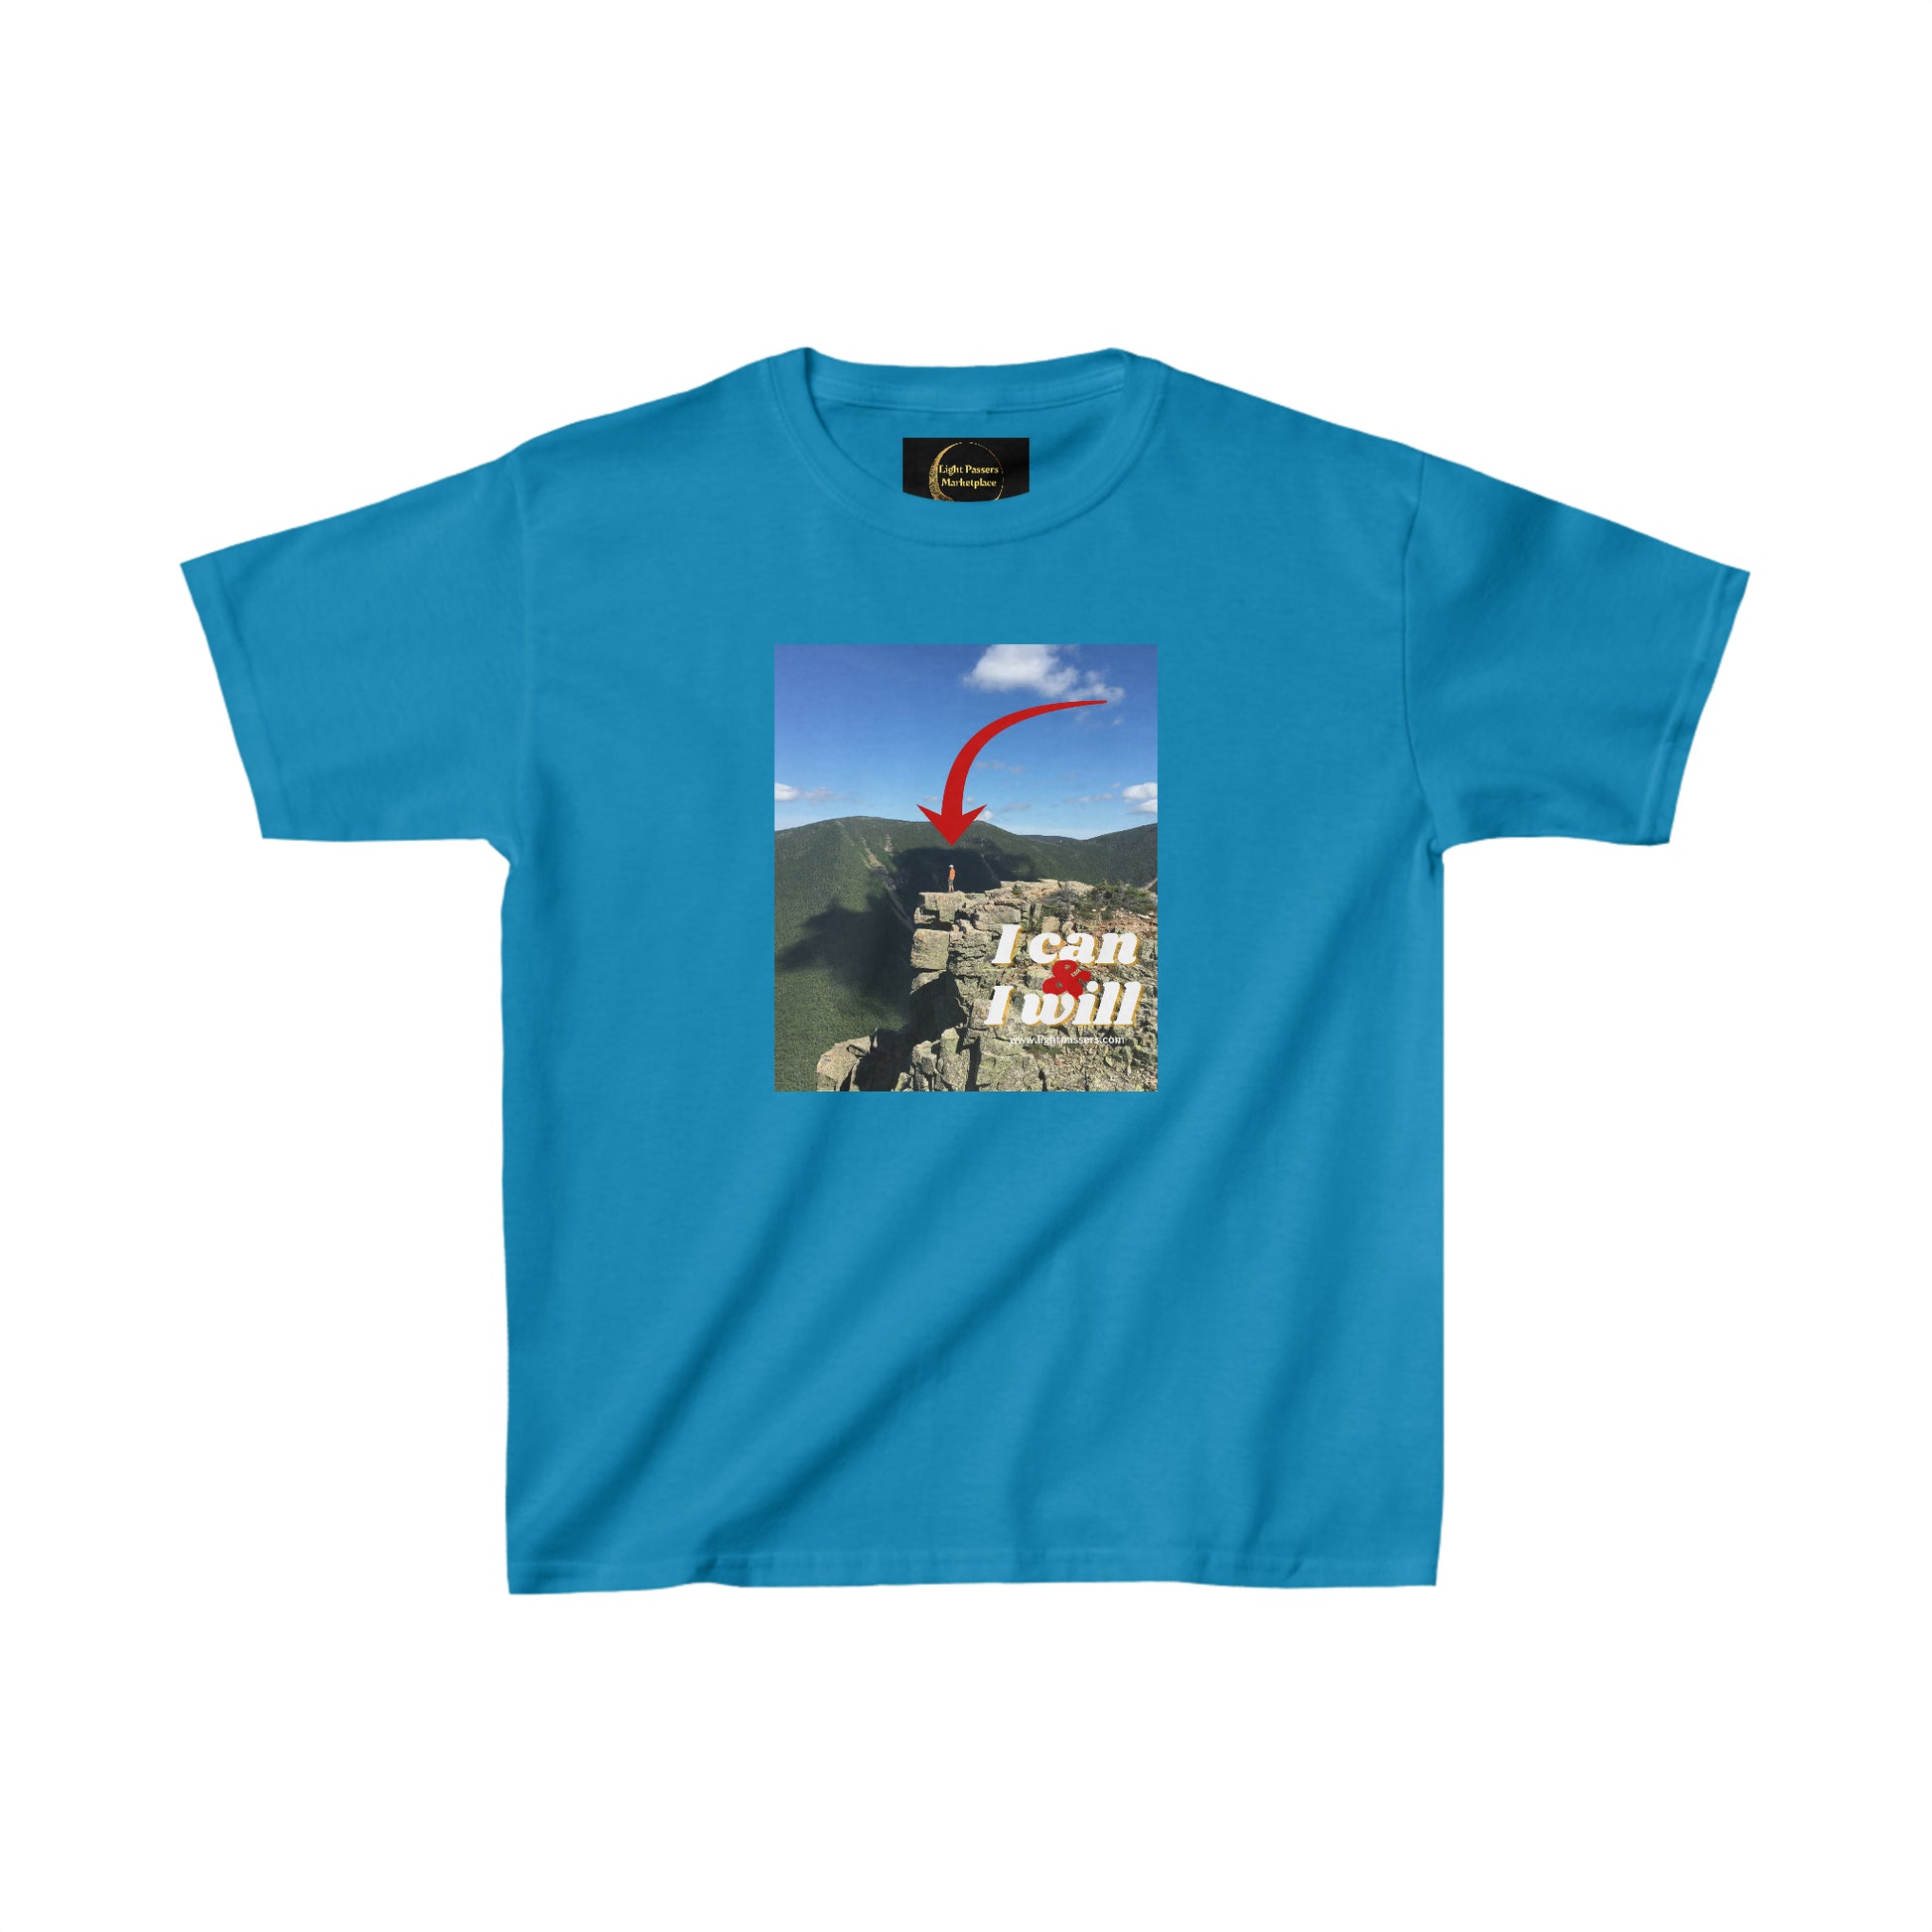 Youth blue shirt featuring a mountain and red arrow design. Made of 100% cotton for solid colors, with twill tape shoulders for durability and curl-resistant collar. Ethically sourced US cotton.